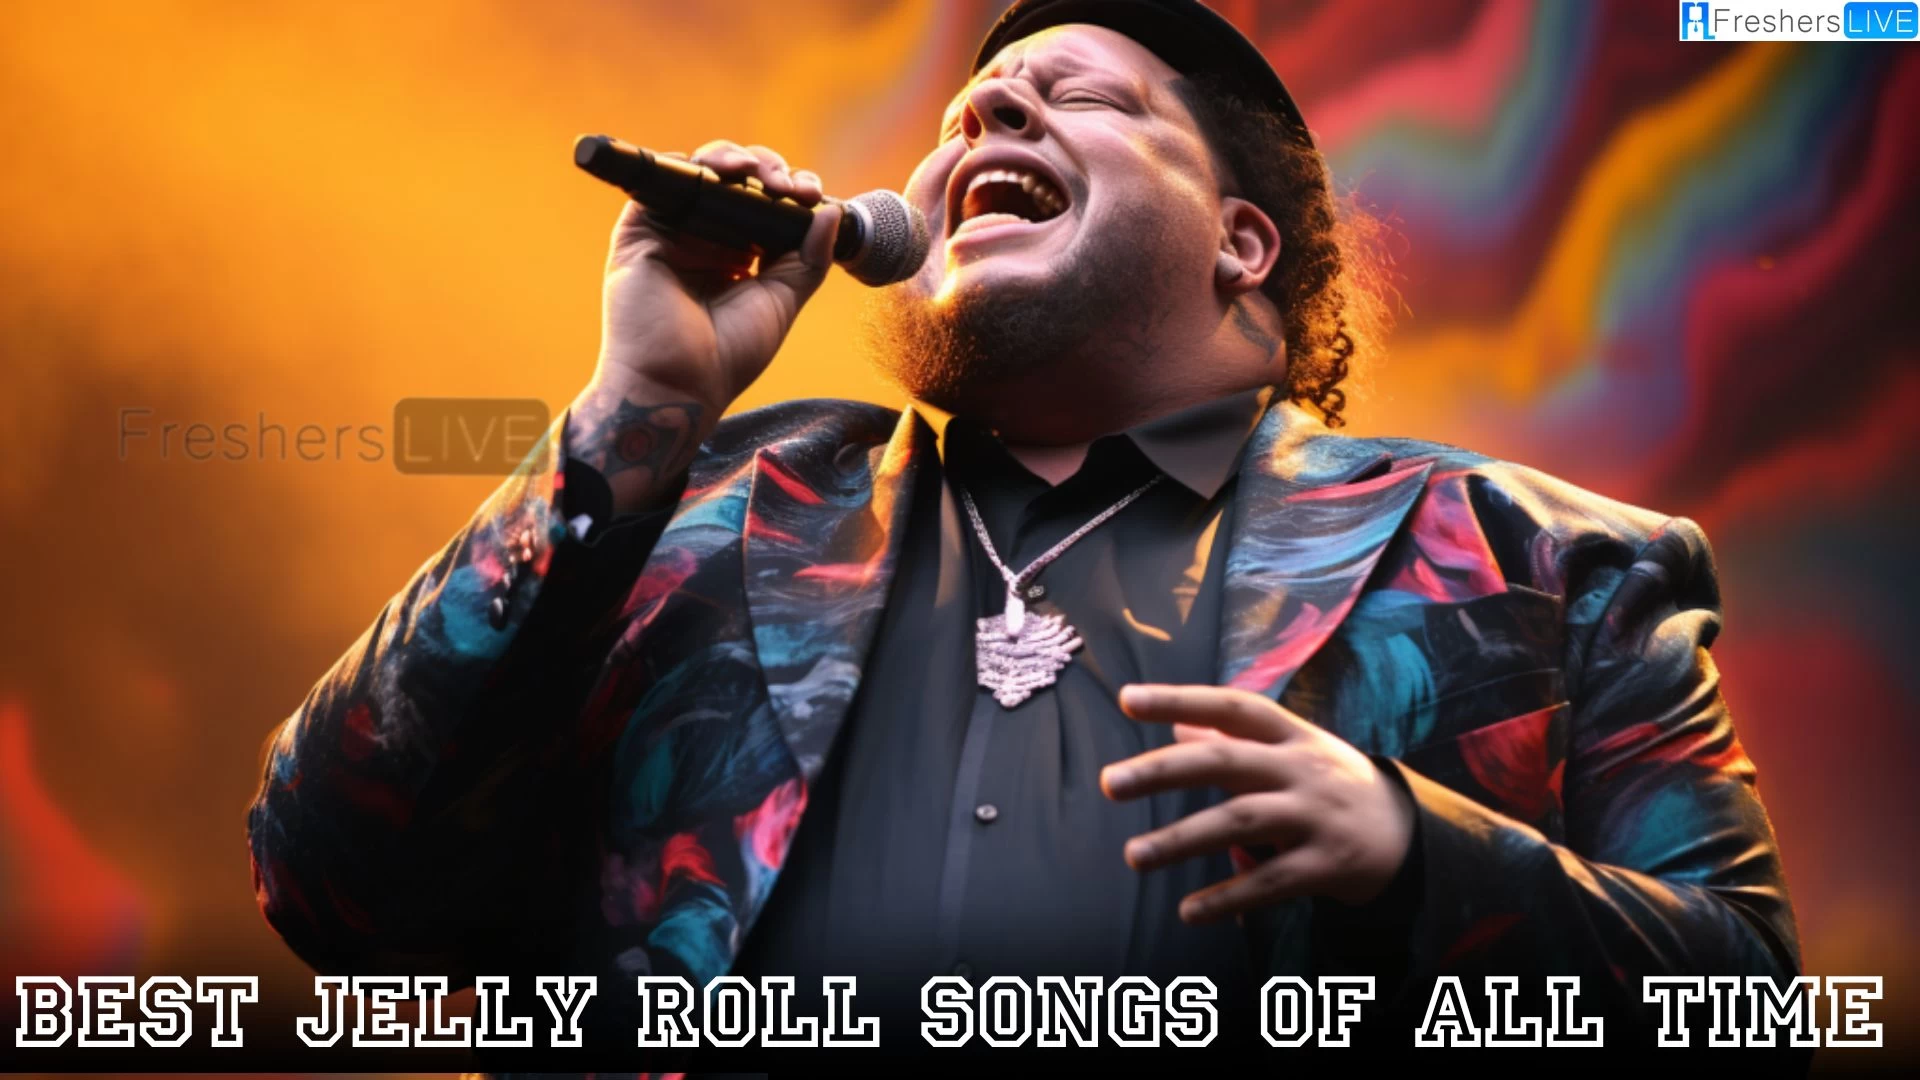 Best Jelly Roll Songs of All Time - Top 10 Timeless Anthems